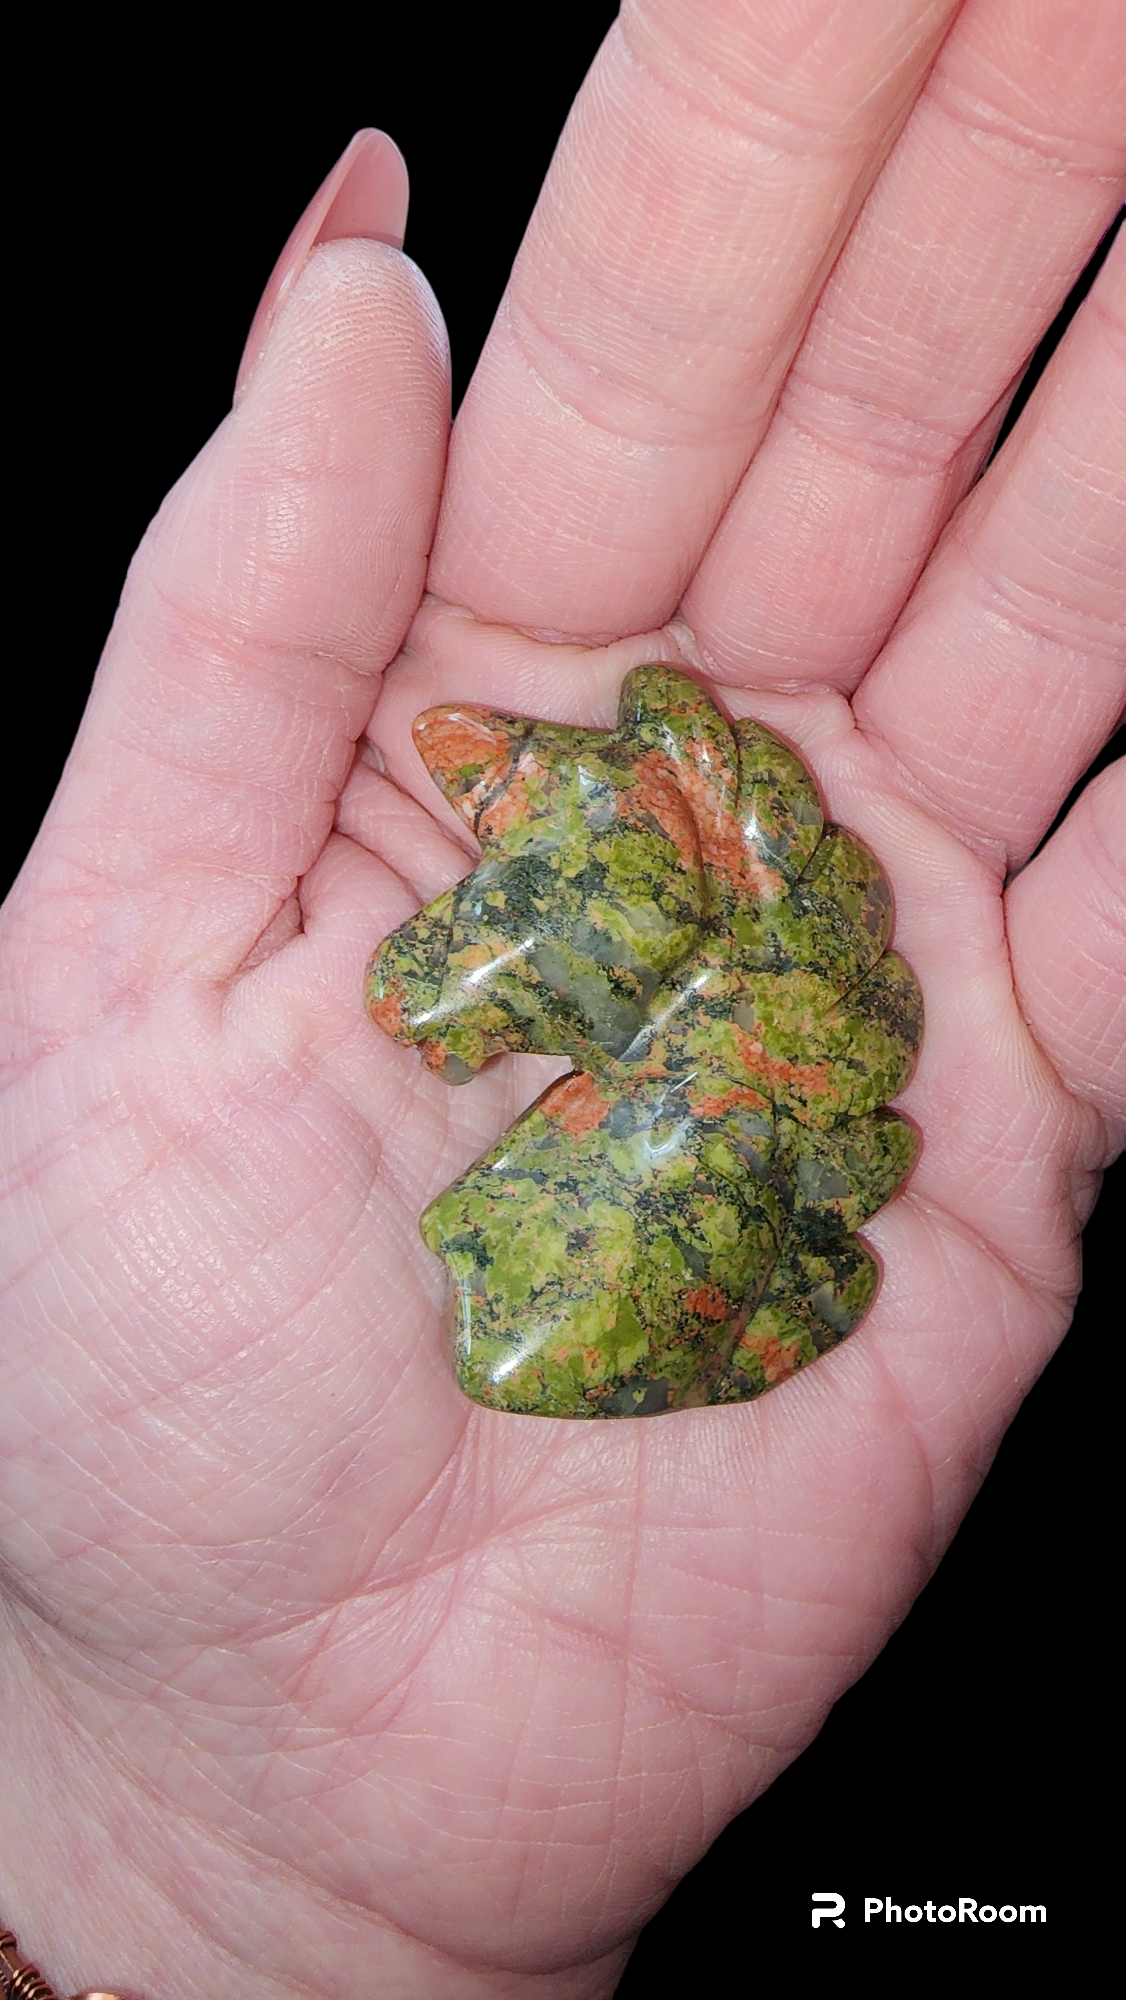 Handcrafted Unakite Crystal Unicorn Head Sculpture | Reiki Charged